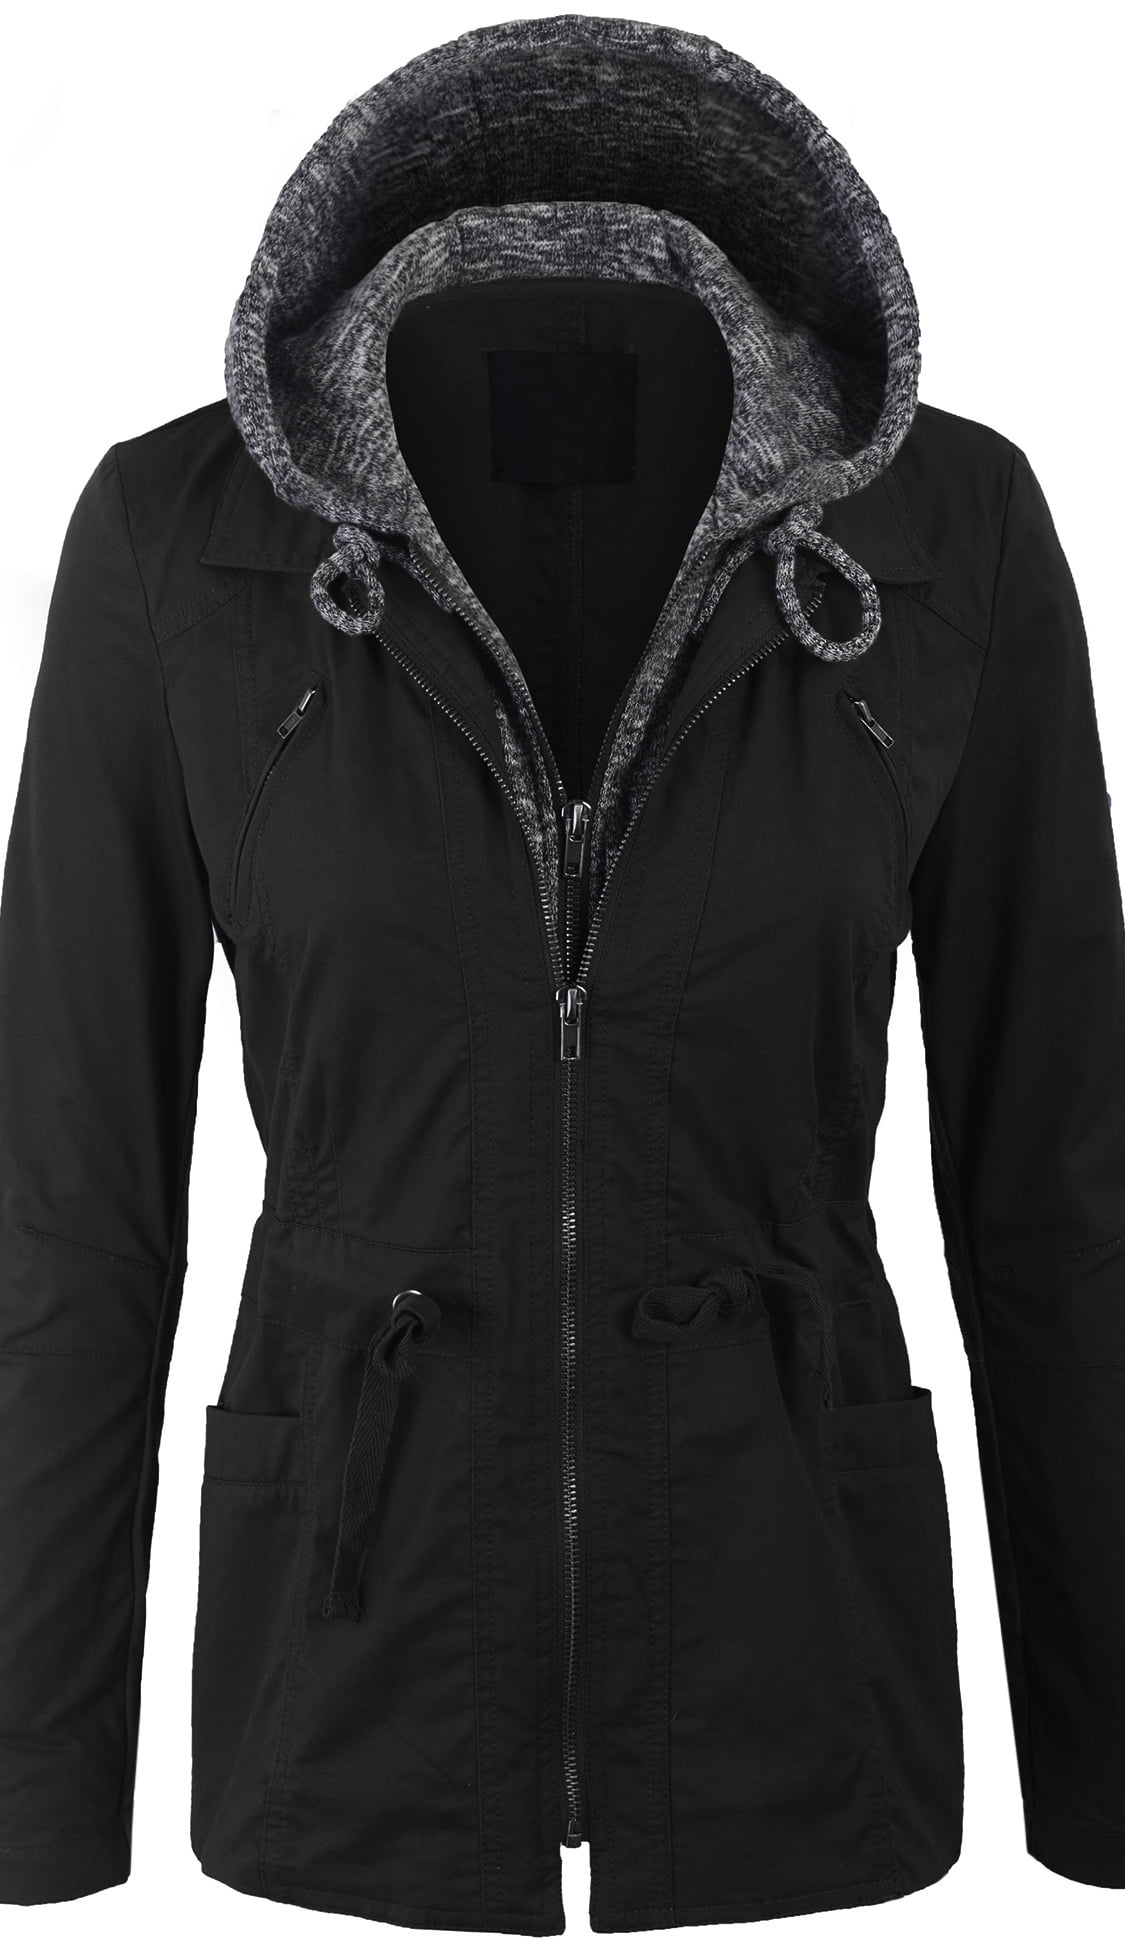 KOGMO Womens Military Anorak Jacket with Knit Hood and Pockets ...